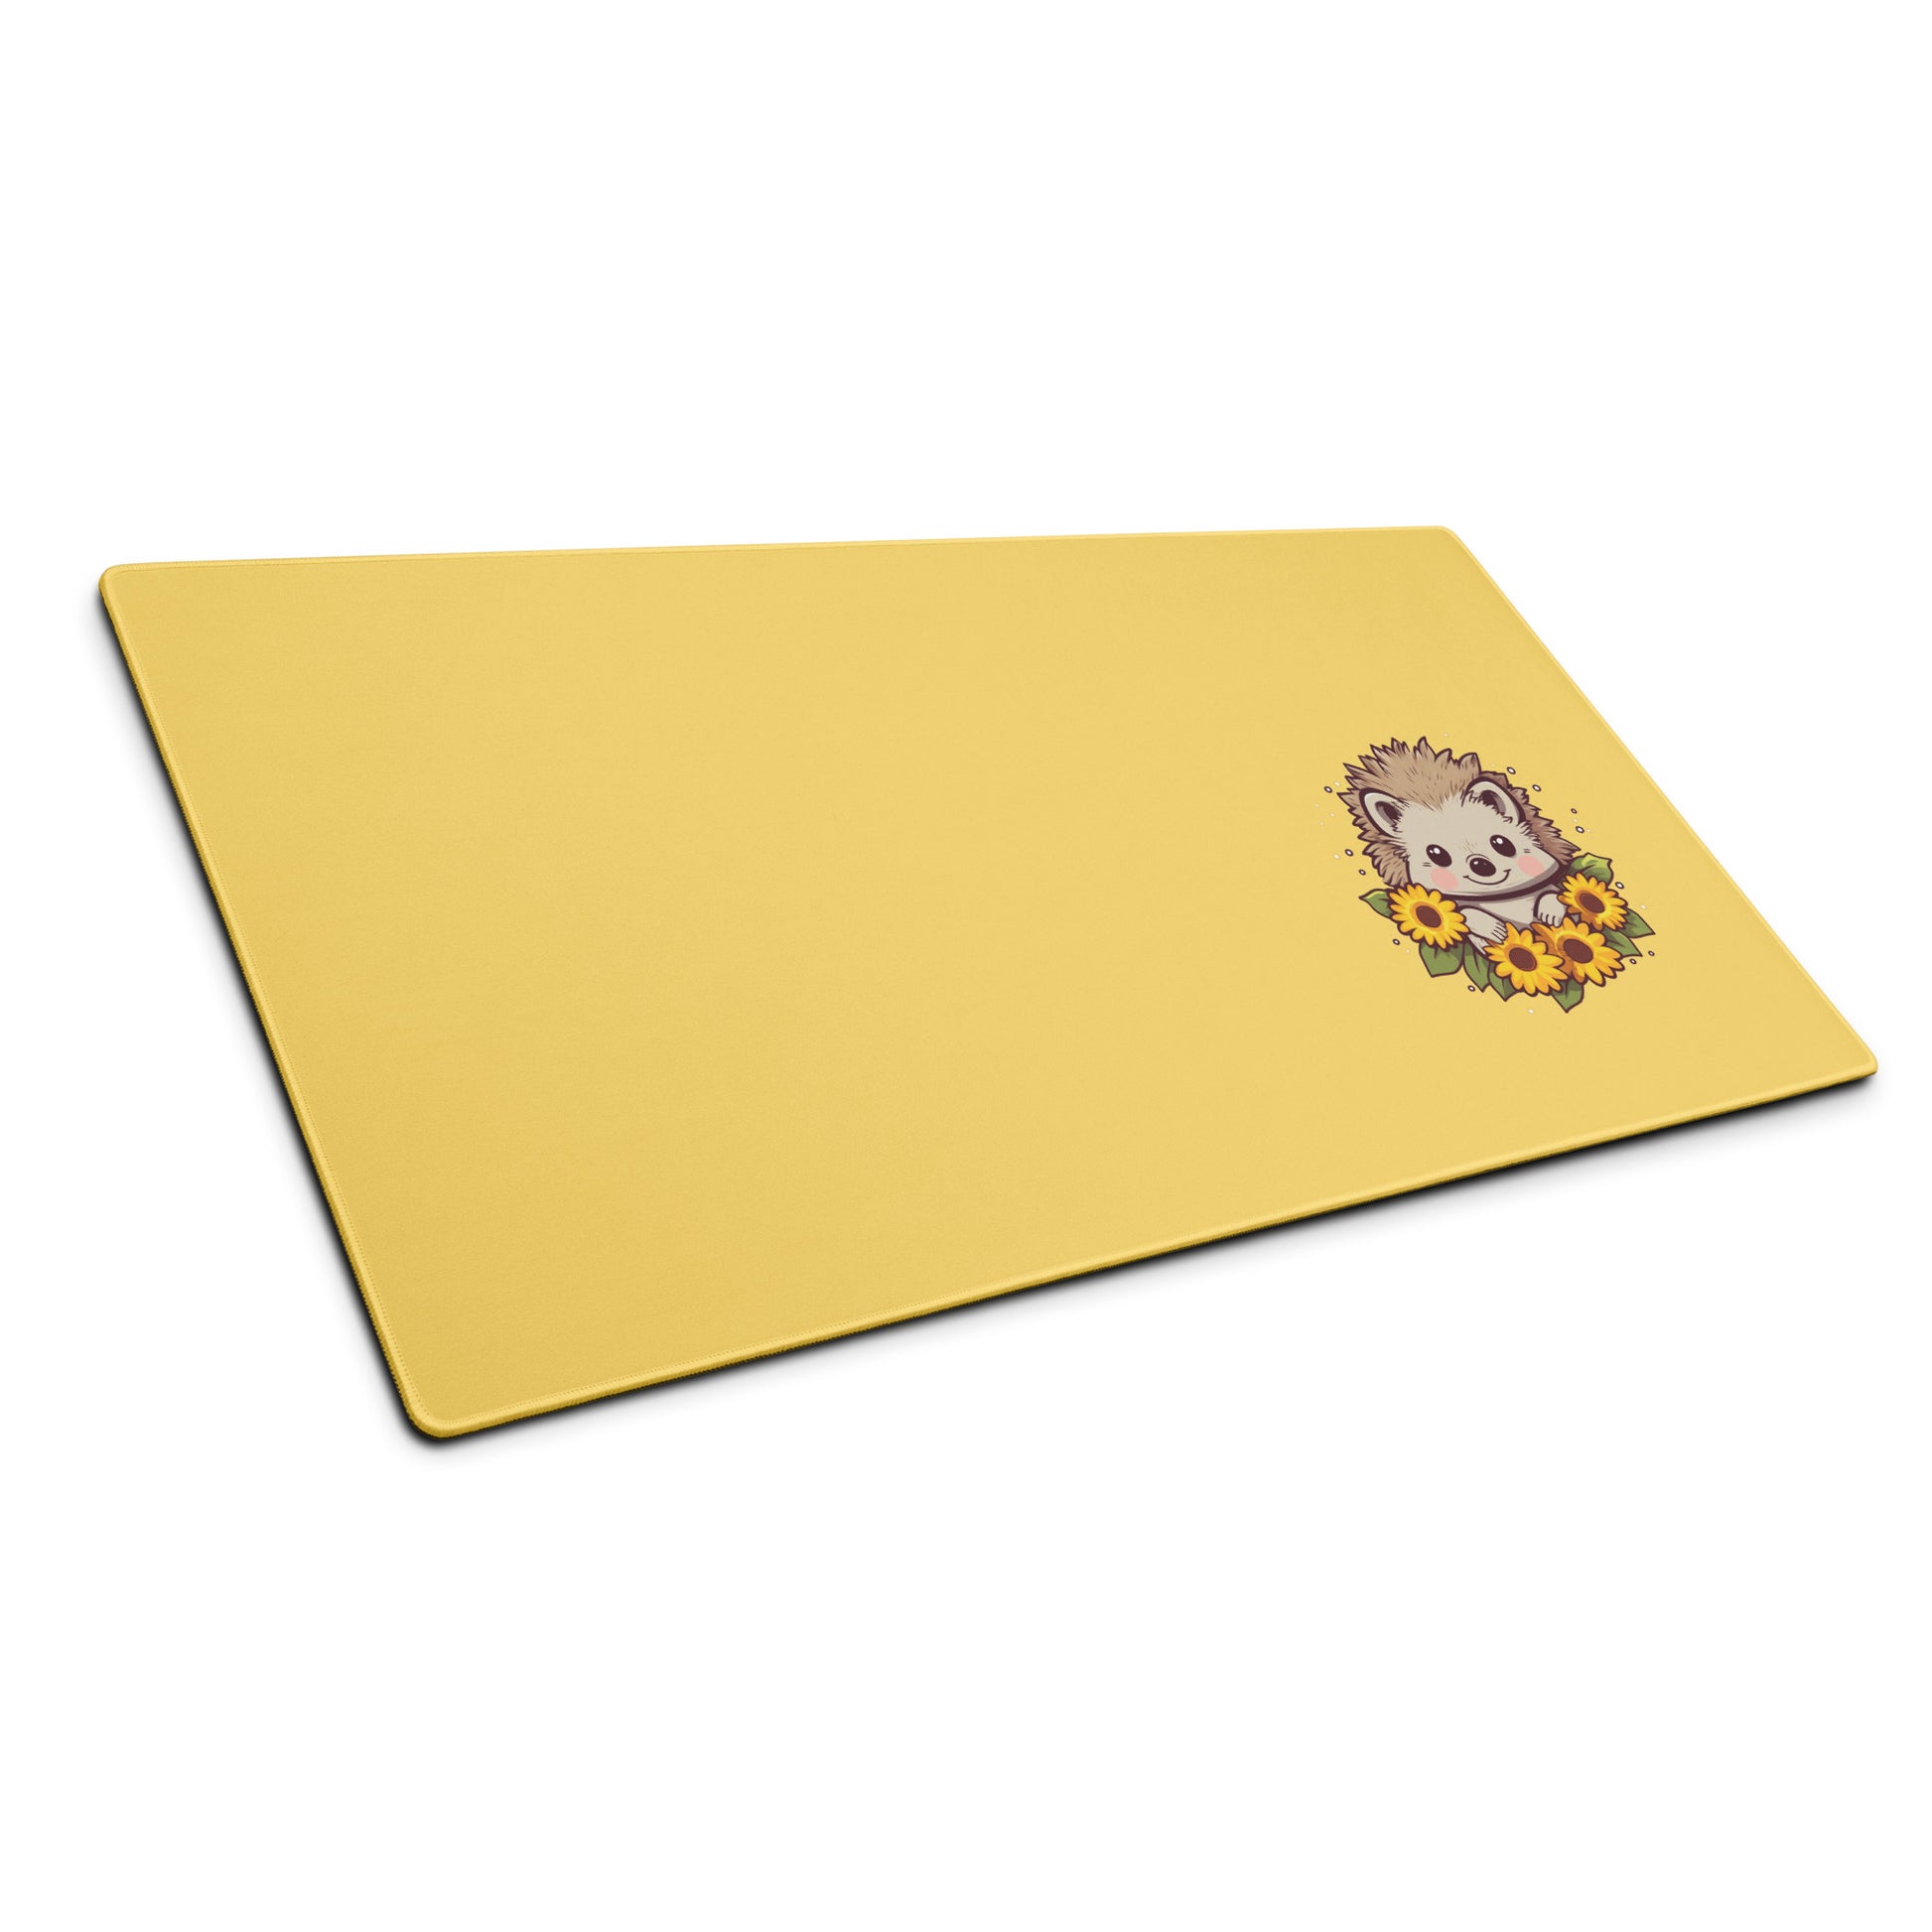 A 36" x 18" desk pad with a cute hedgehog surrounded by sunflowers on it shown at an angle. Yellow in color.